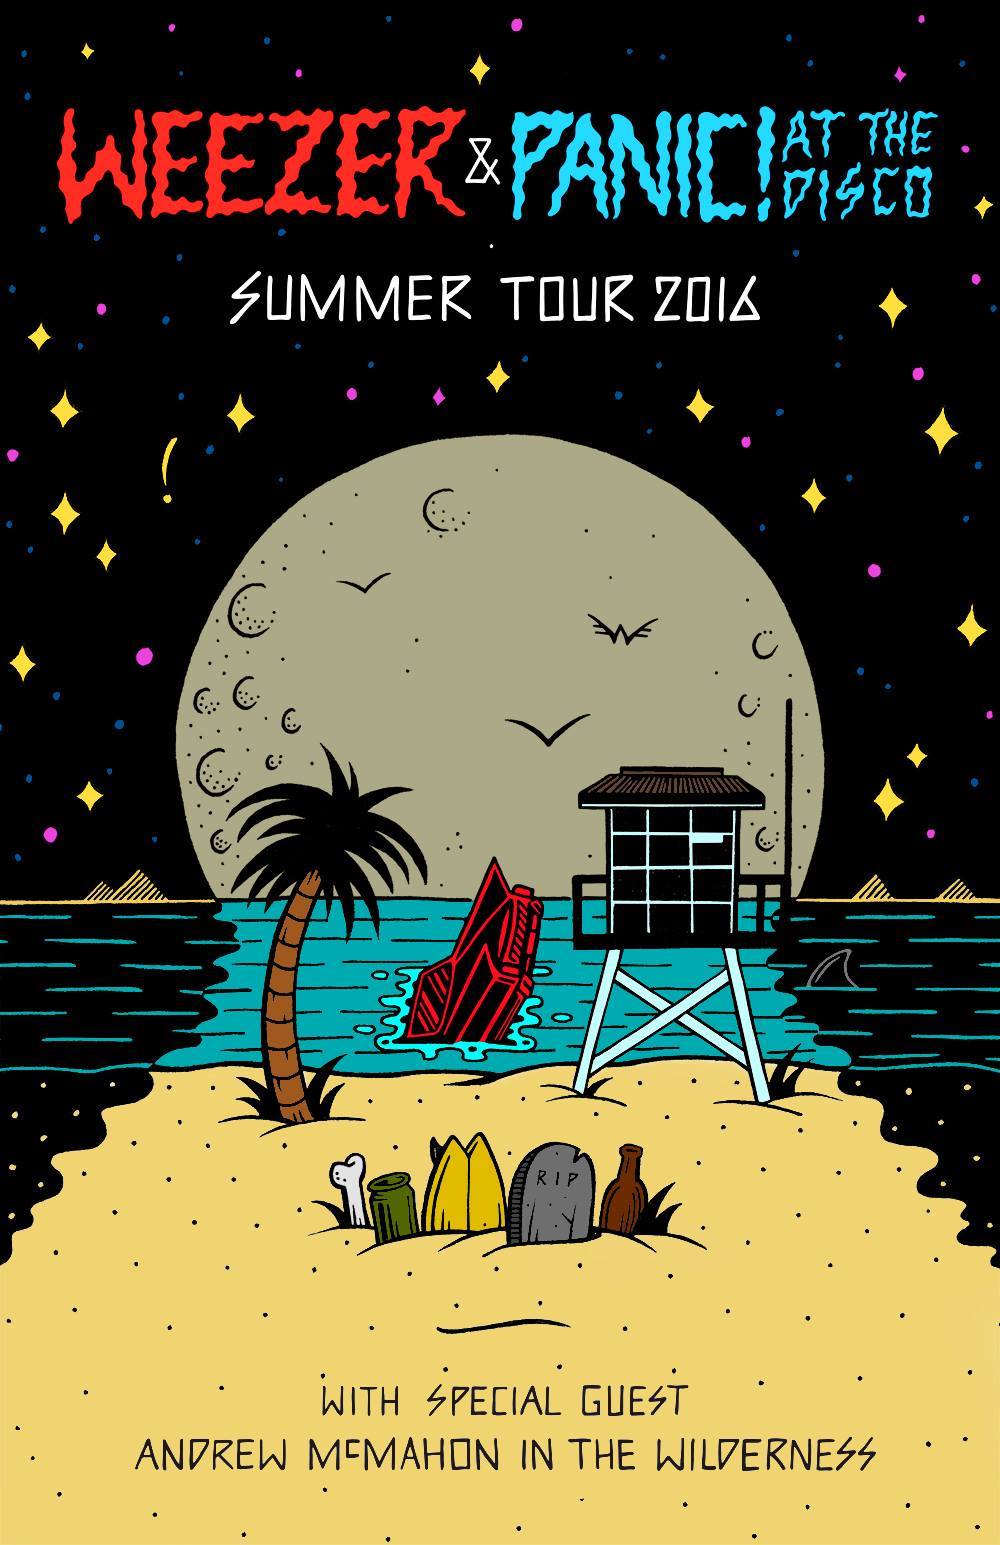 Weezer and Panic! At The Disco Summer Tour 2016 On Sale Today!